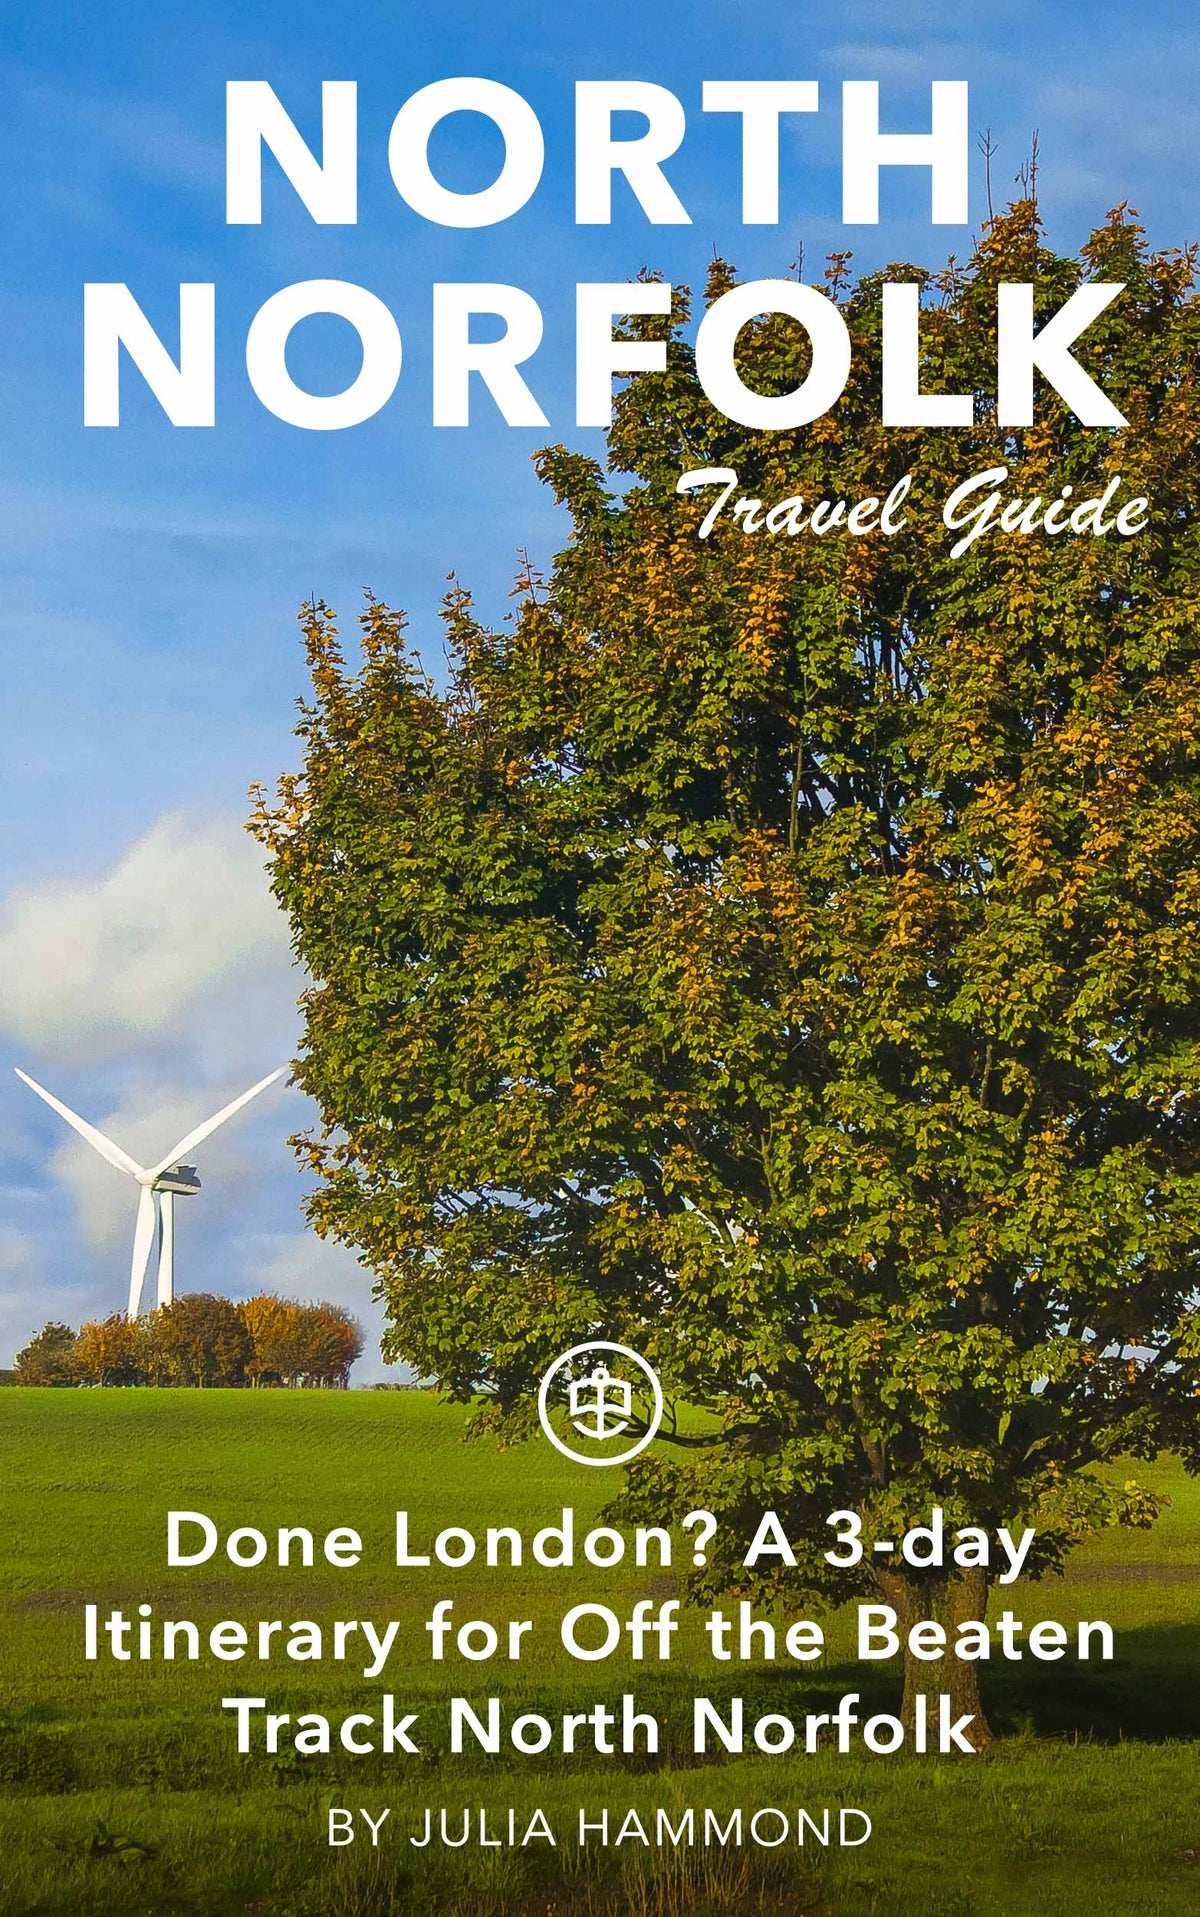 Done London? A 3-day itinerary for off the beaten track North Norfolk